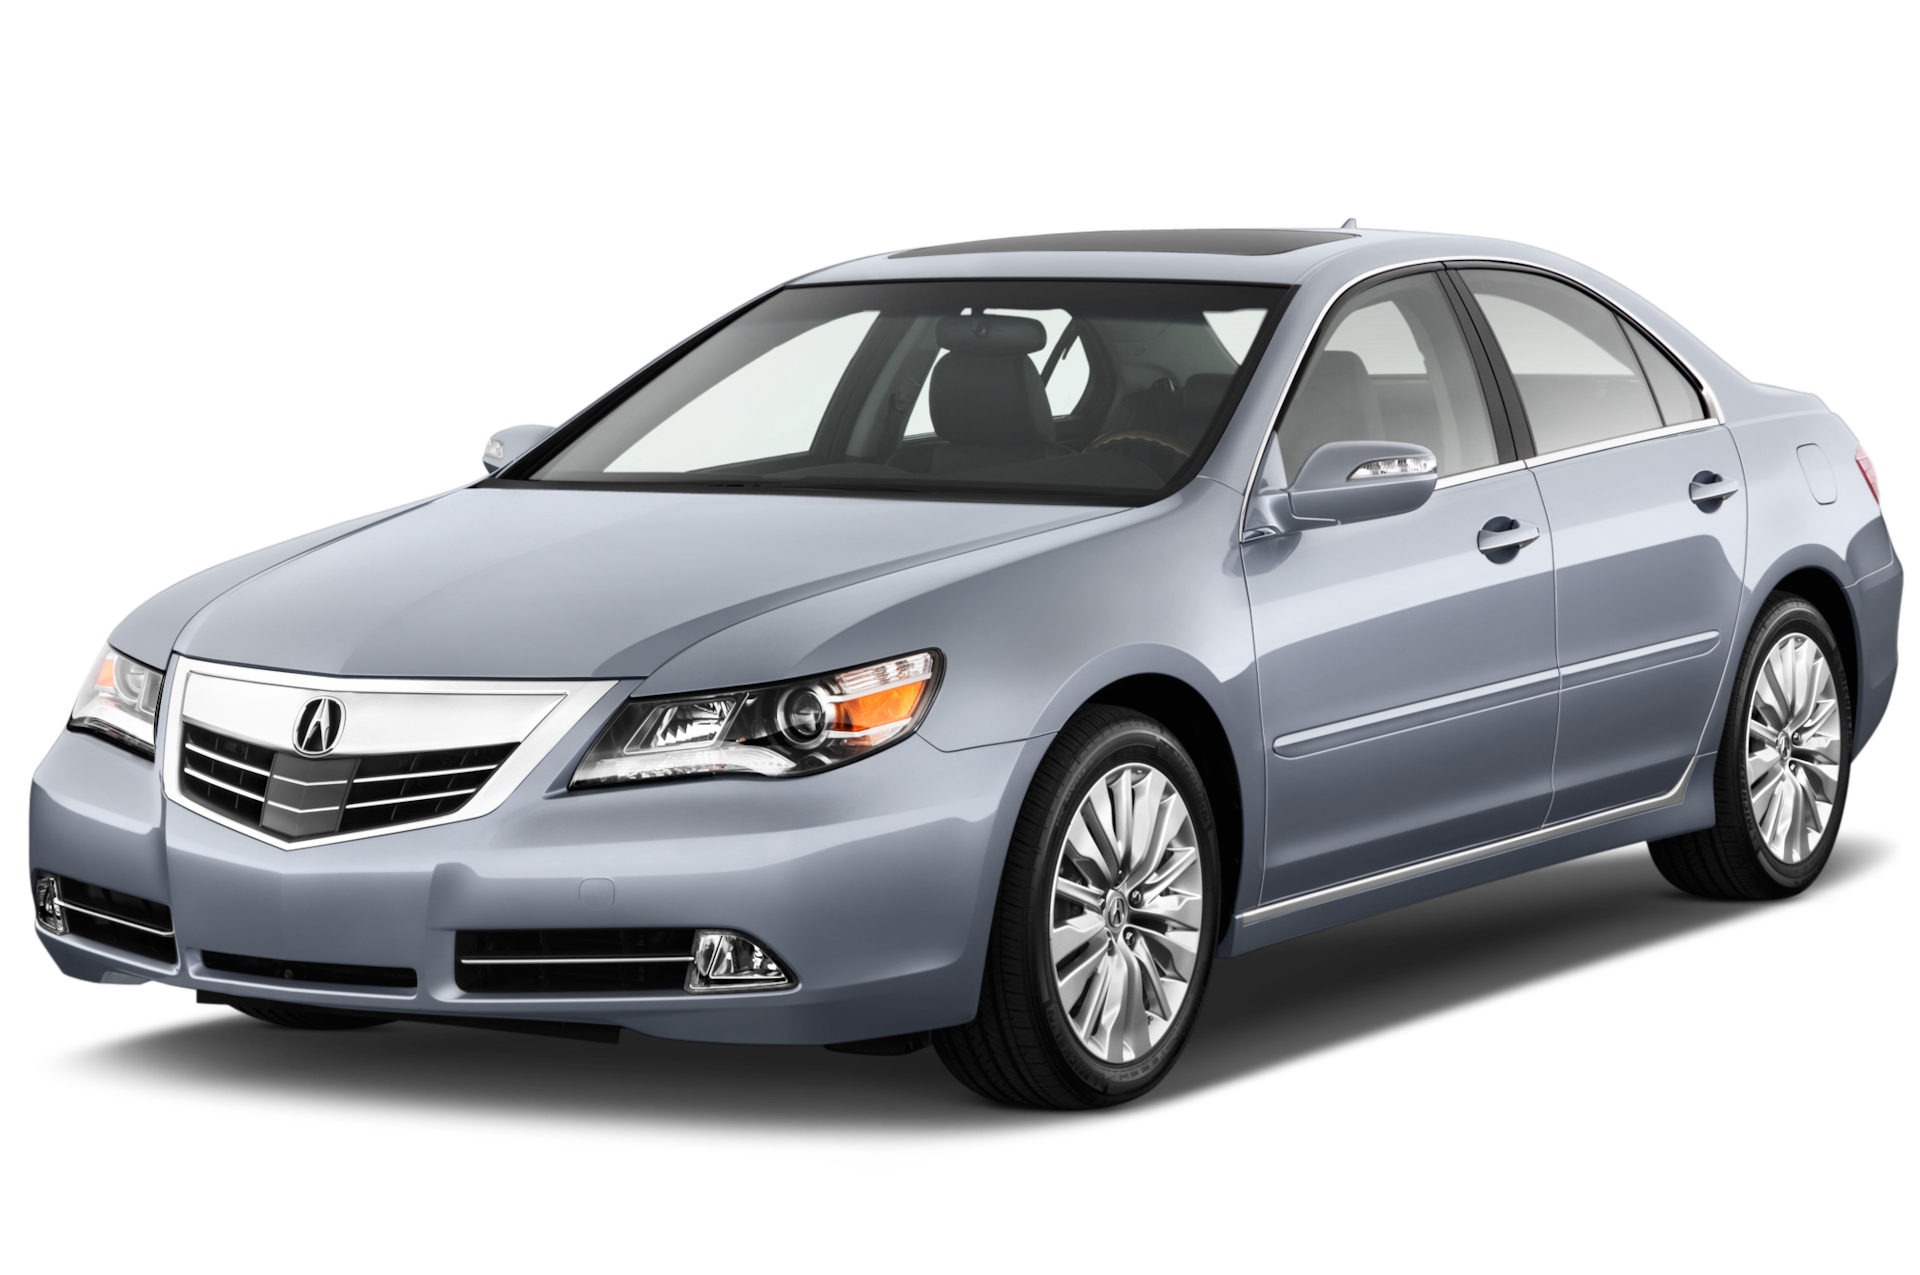 2012 Acura RL Prices, Reviews, and Photos - MotorTrend